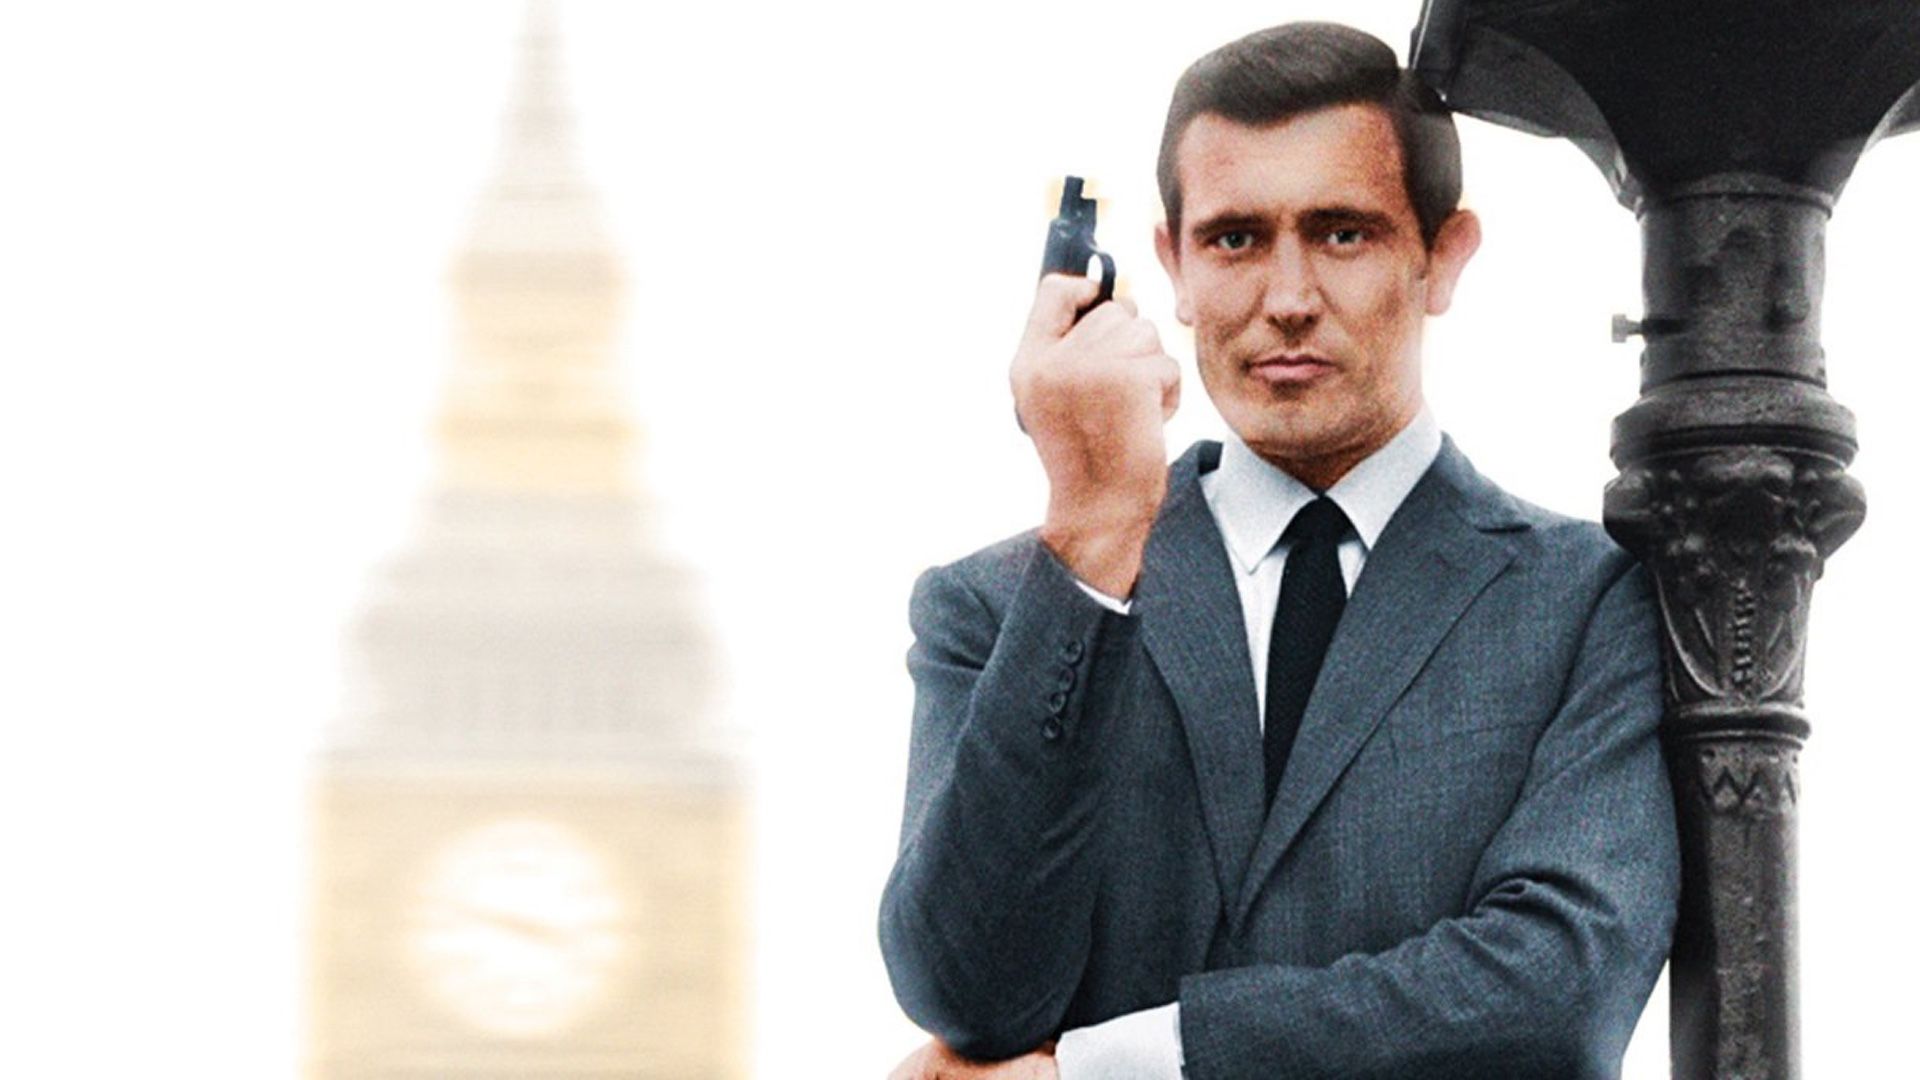 New James Bond Doc Tells The Crazy Story Of One Time 007 George Lazenby, Who Had It All And Gave It Up